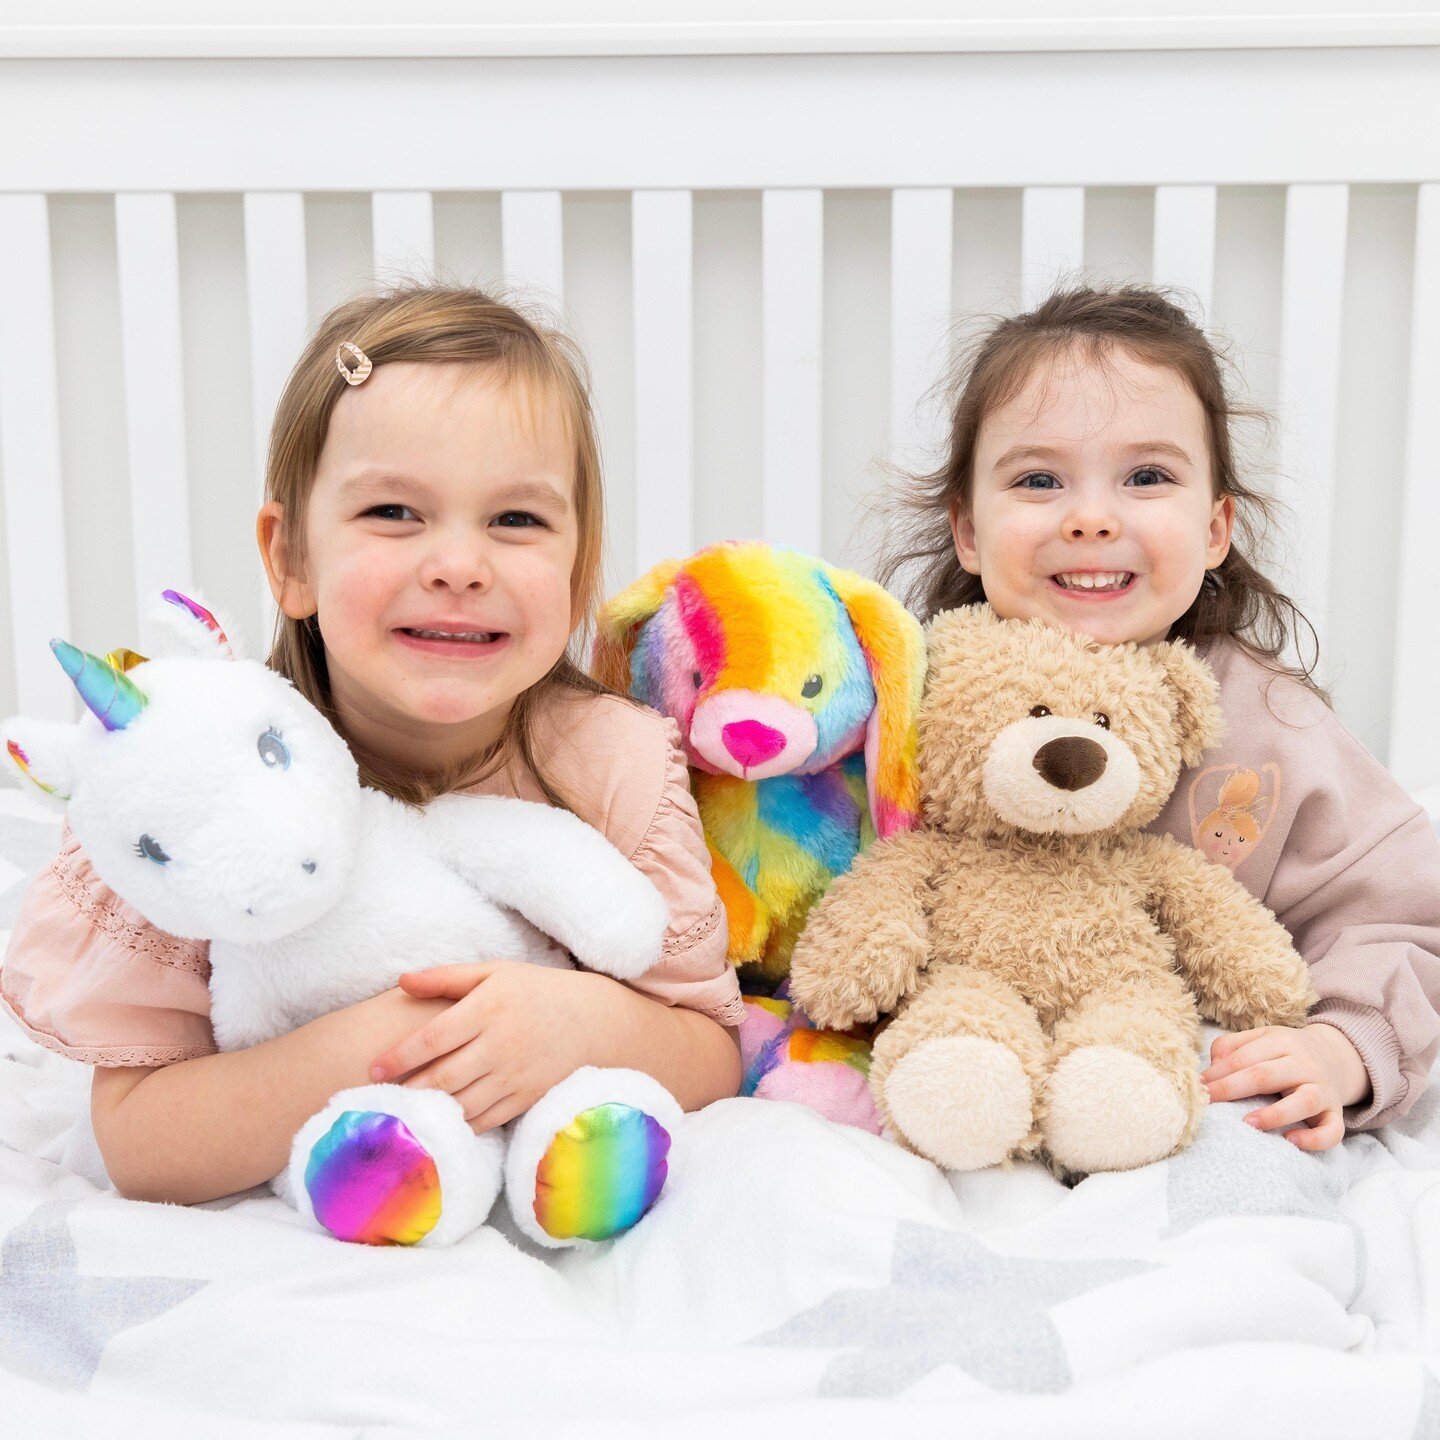 Whether it&rsquo;s at the park, in your garden or in your lounge on a rainy day, why not make yours extra fun by holding a DesignaBear Teddy Bears' Picnic!

Grab a blanket, your favourite teddy, some yummy picnic food and download our free printables